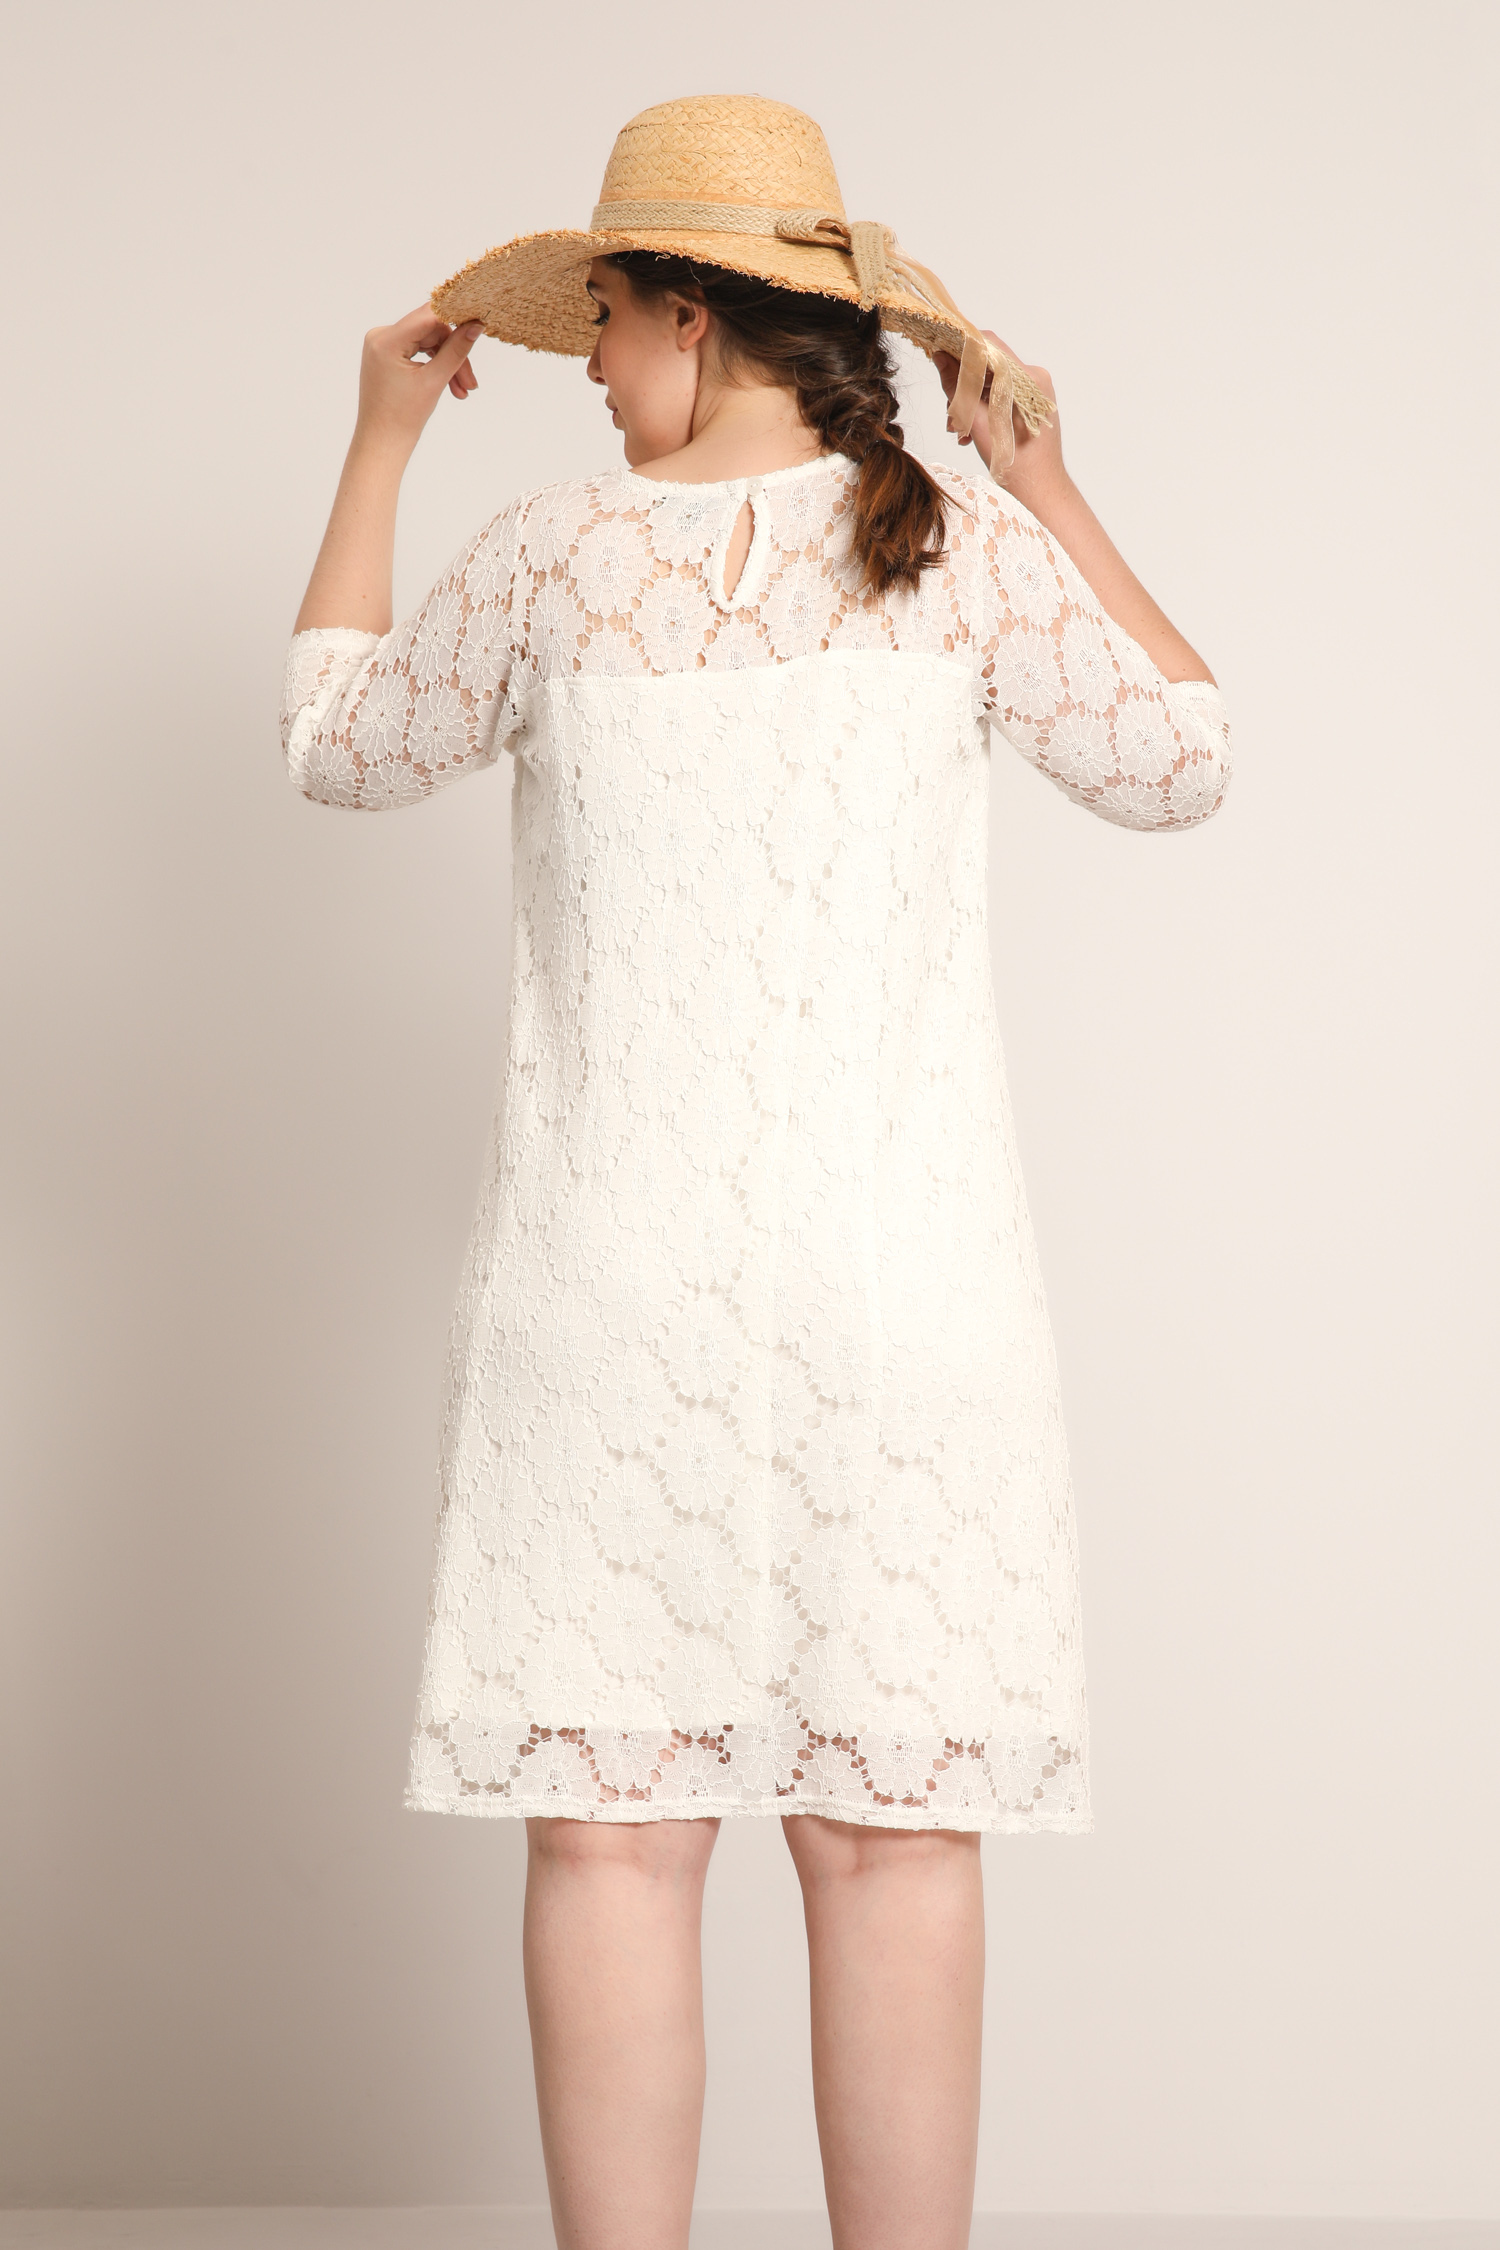 Straight lined lace dress